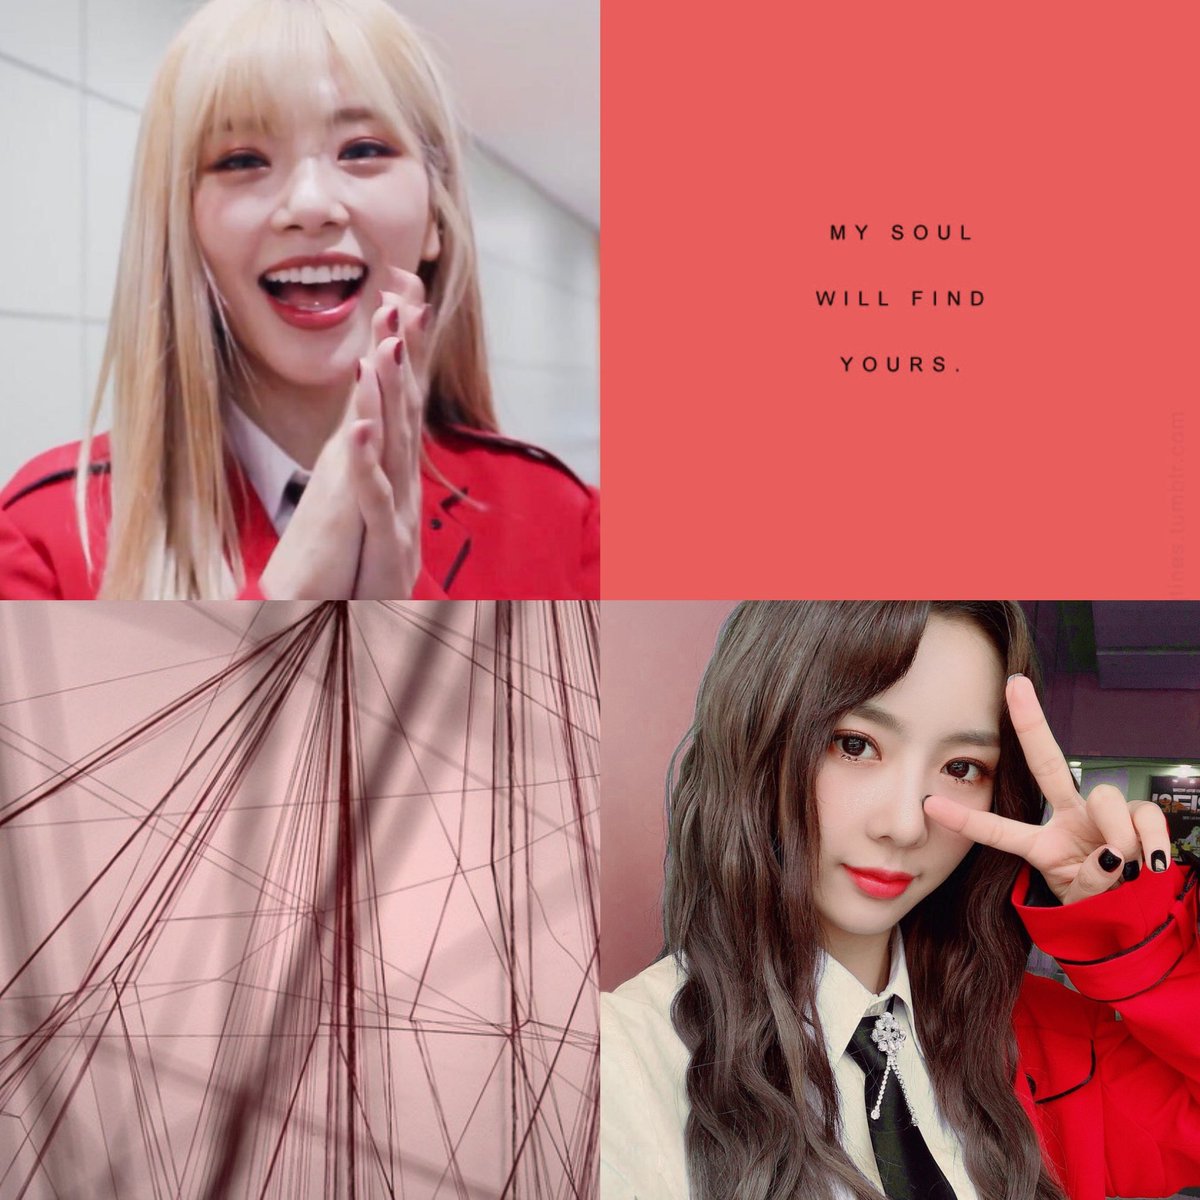 "please believe, we will meet again"minji and yoohyeon are soulmates, connected by the red string of fate. after an accident, minji wakes up without the string on her finger and yoohyeon is gone. so, minji makes it her mission to find her soulmate again no matter what it takes.